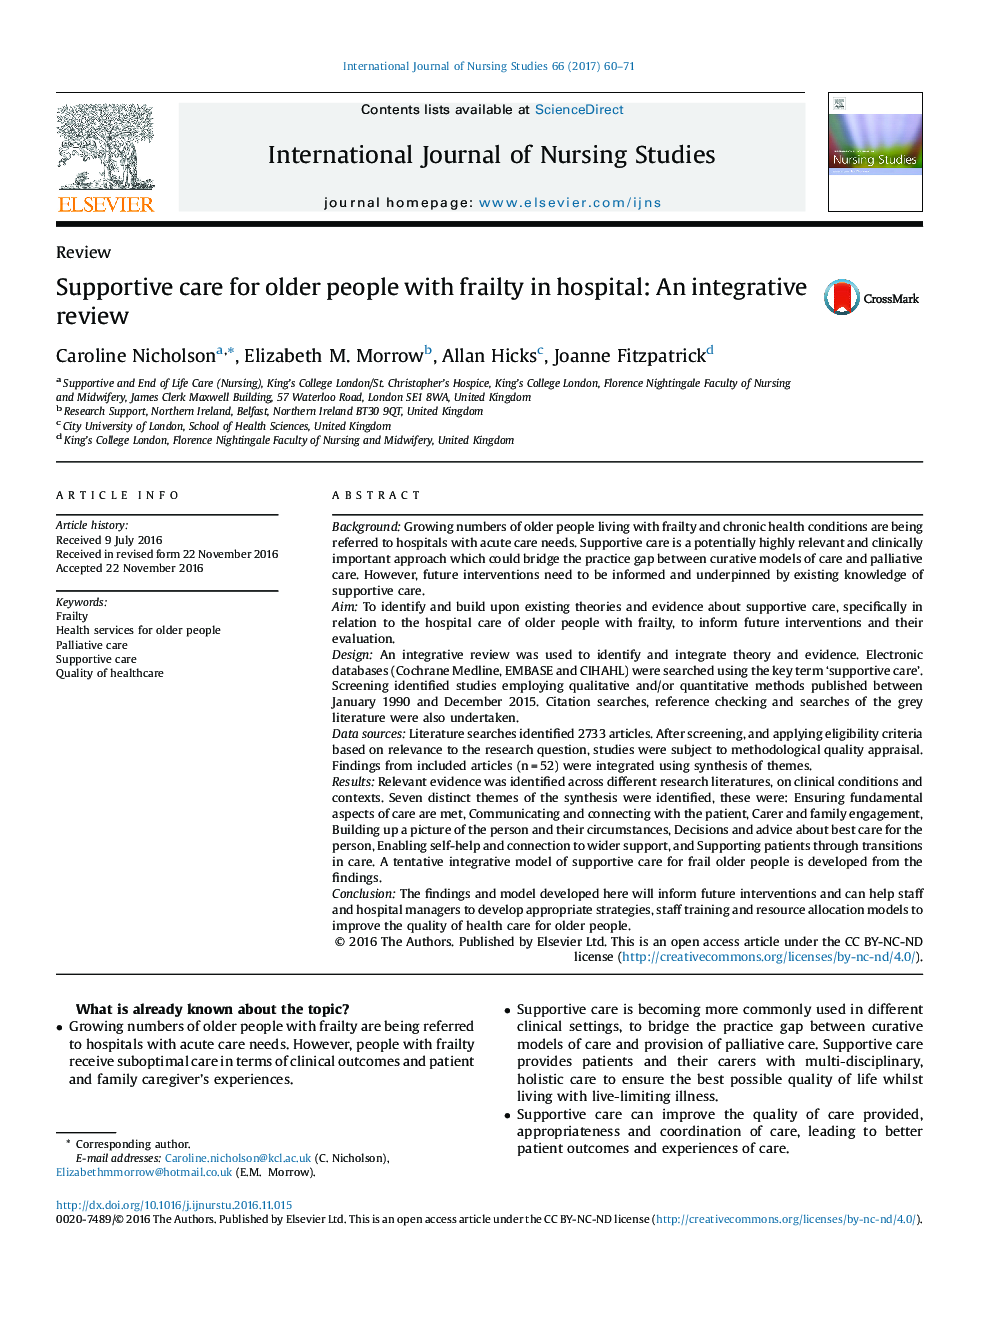 Supportive care for older people with frailty in hospital: An integrative review